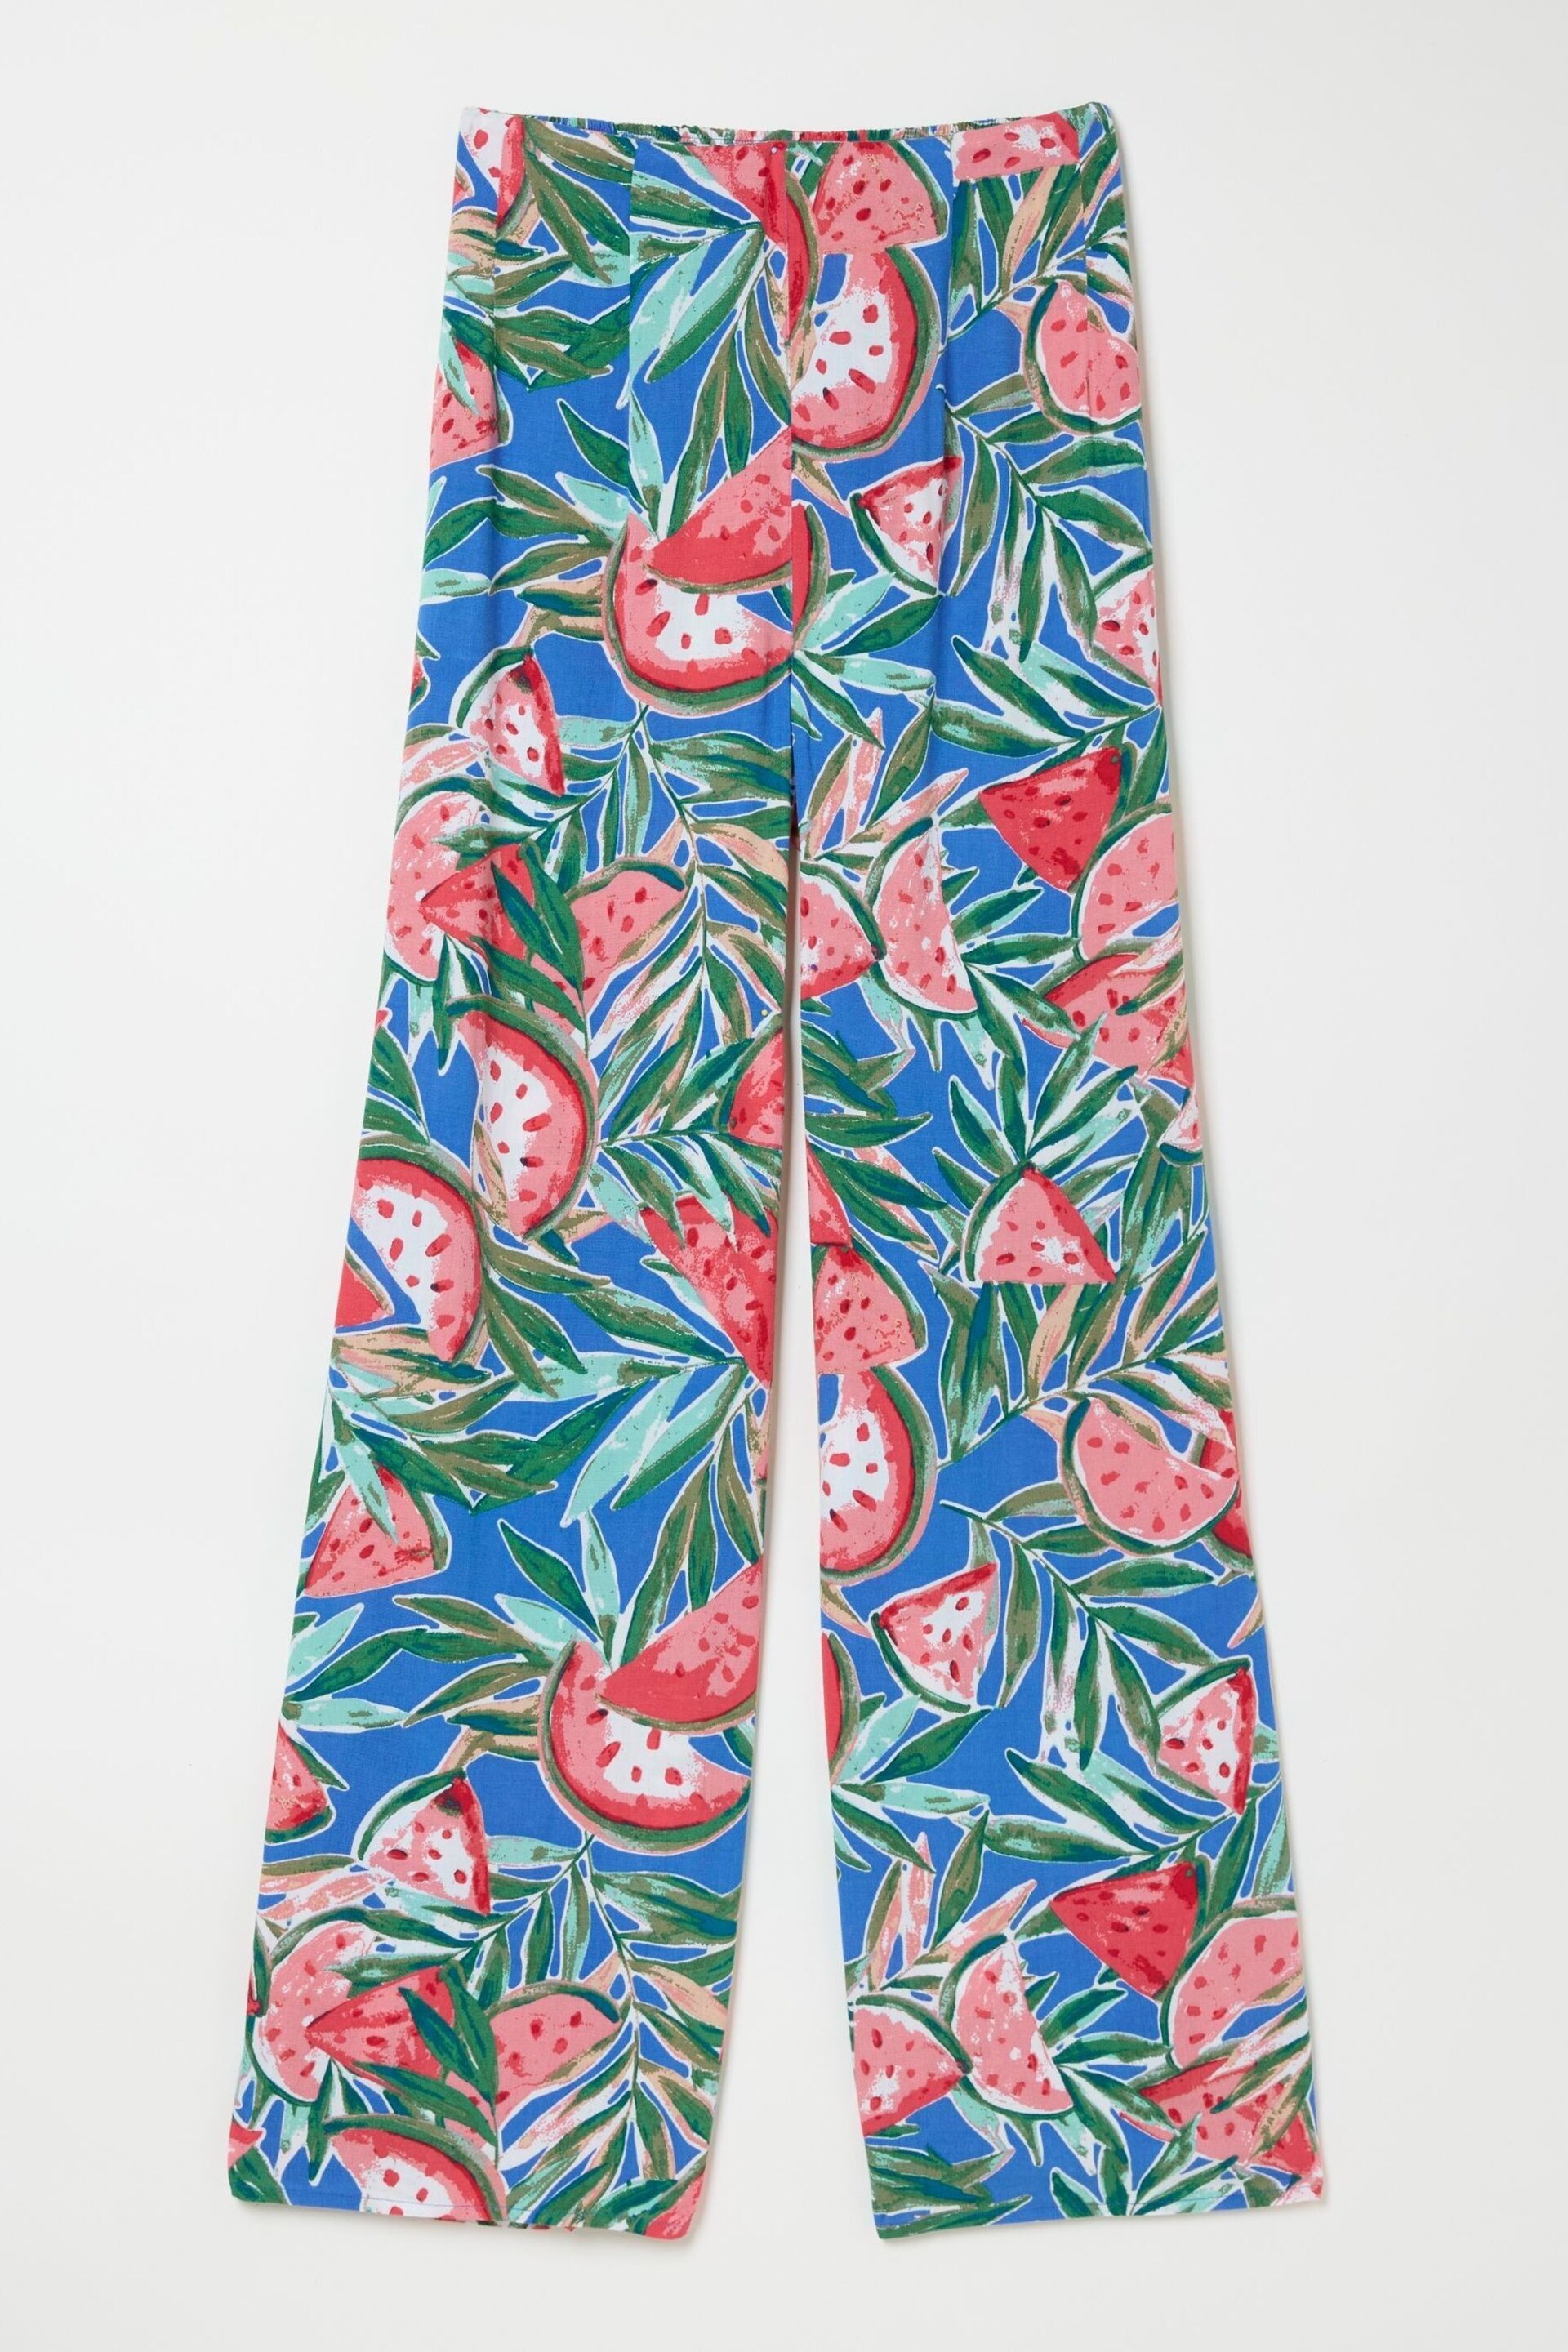 FatFace Blue Ines Watermelons Wide Leg Trousers - Image 6 of 6